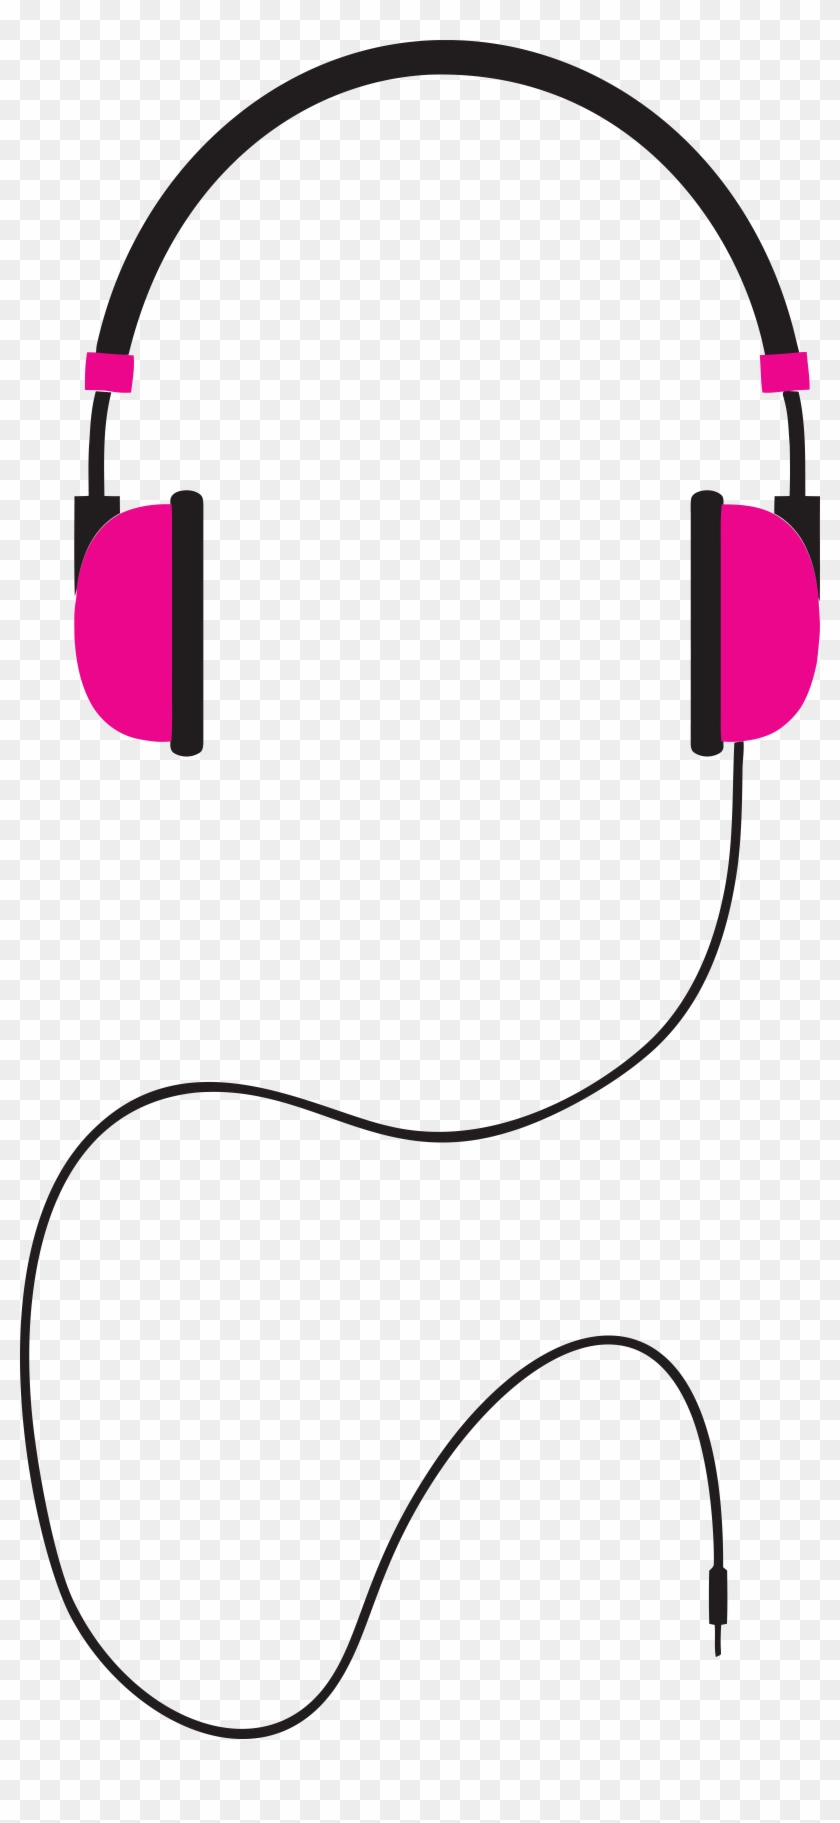 Free Clipart Of A Pair Of Pink Headphones - Headphones Clipart #48729